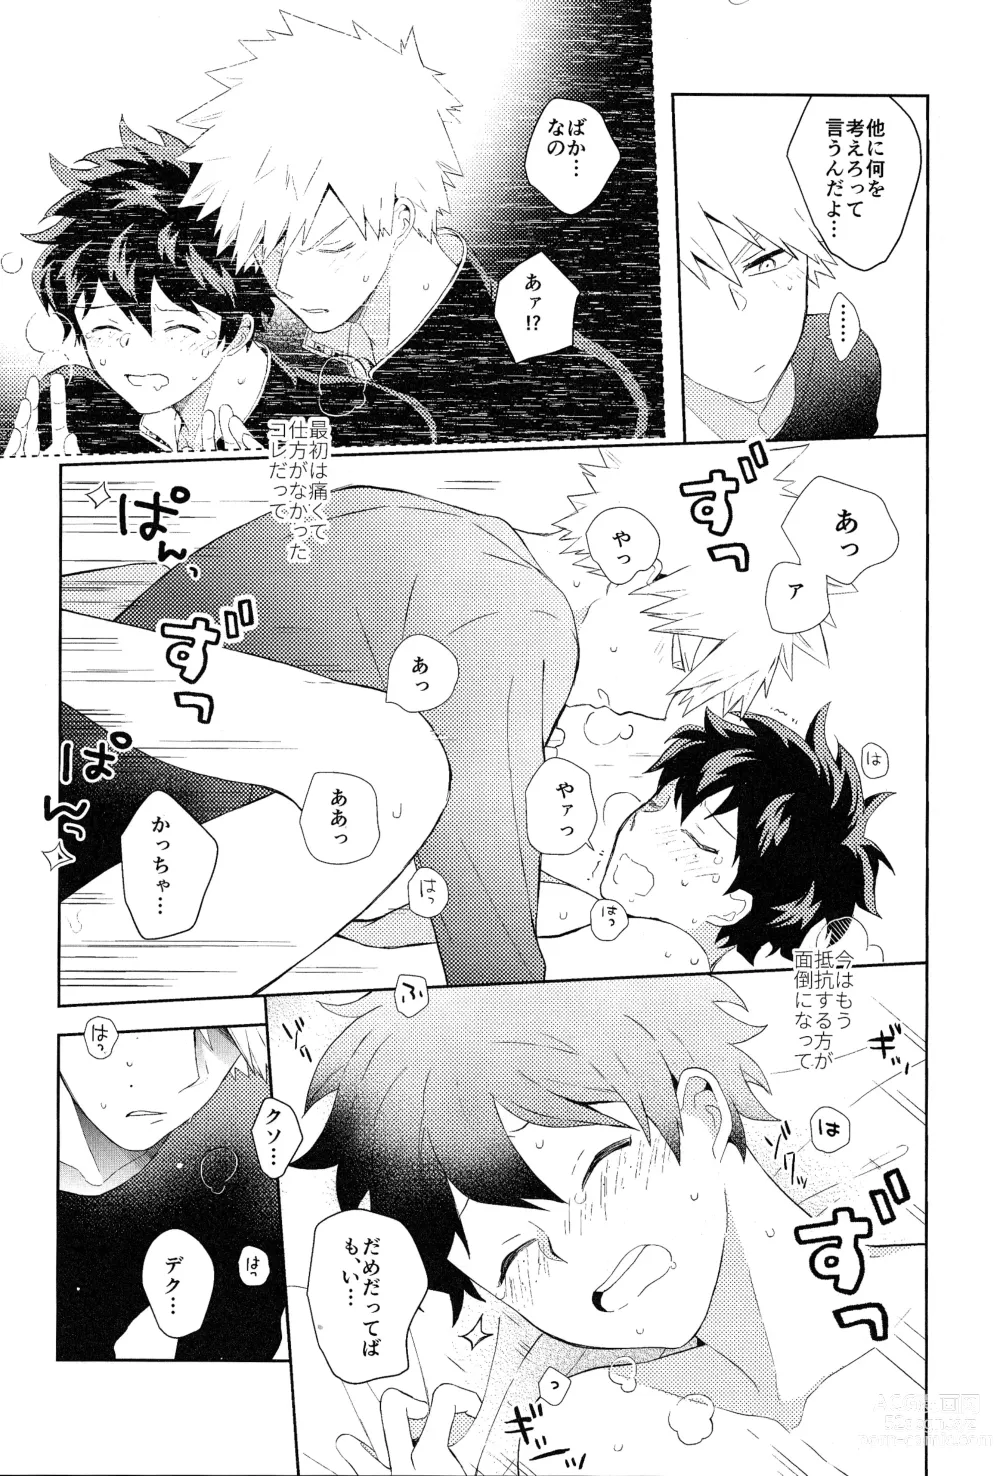 Page 20 of doujinshi The Four Seasons ~KD R18 Anthology~